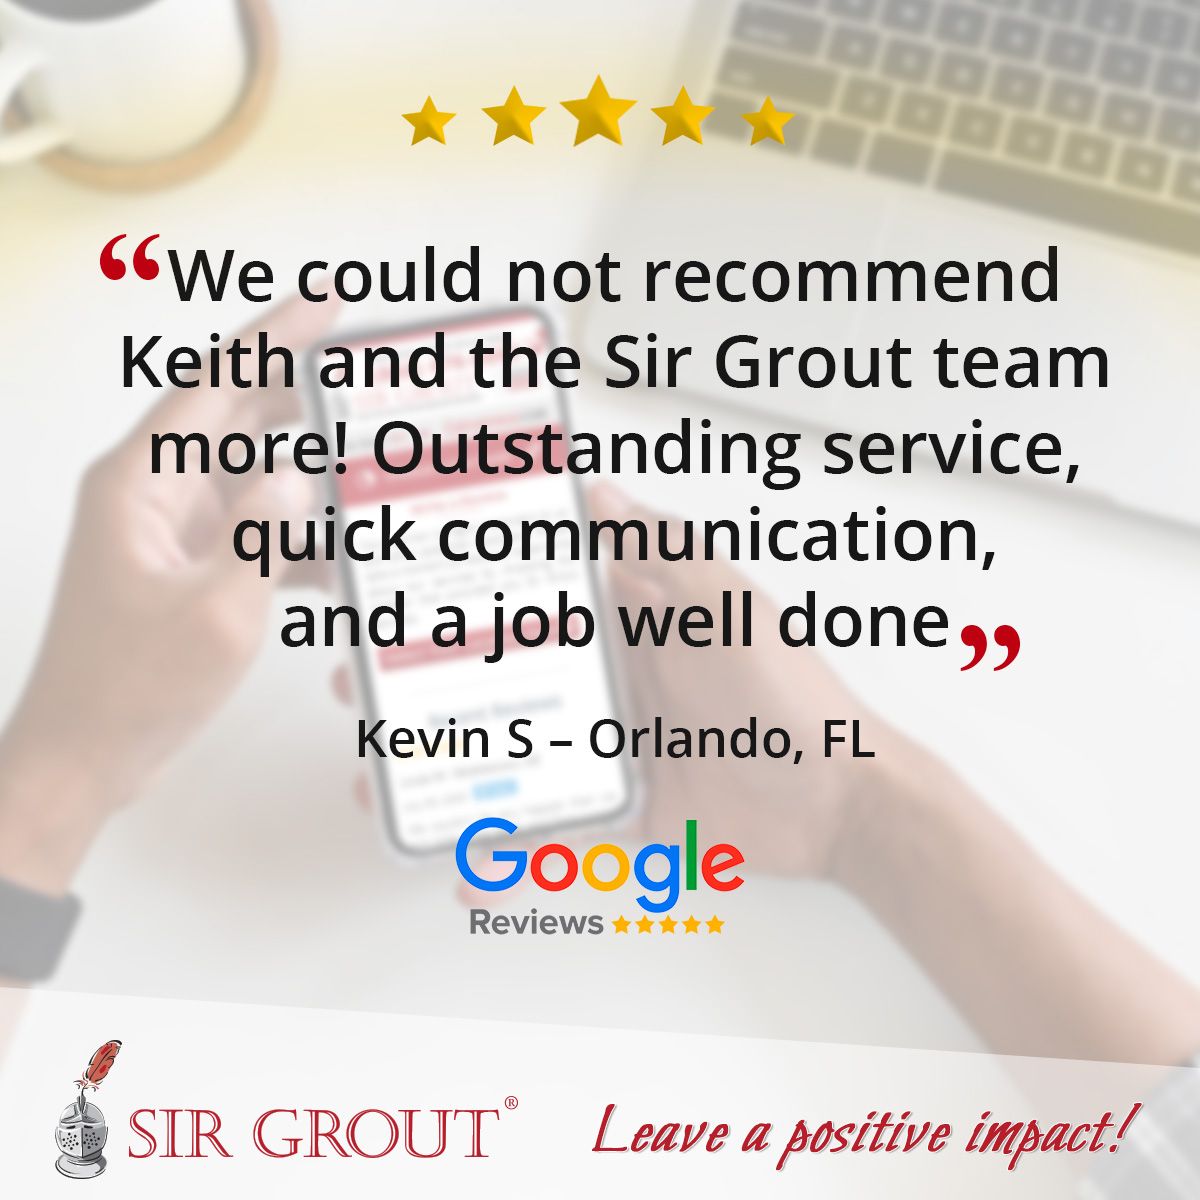 We could not recommend Keith and the Sir Grout team more! Outstanding service, quick communication, and a job well done